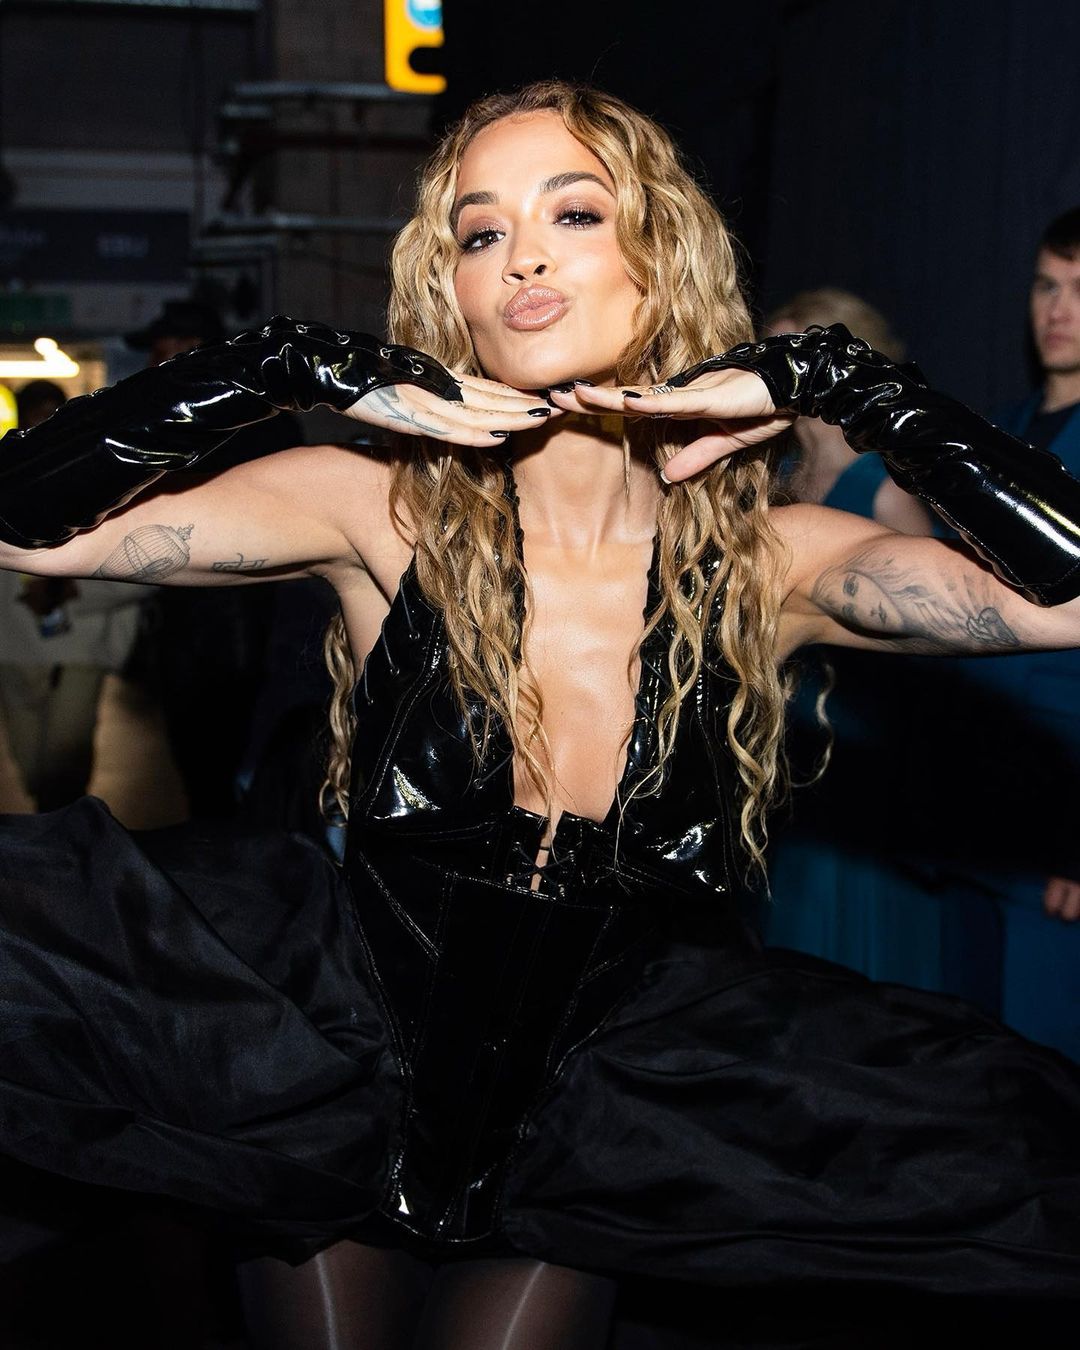 Russell Crowe Brings Rita Ora Out! - Photo 28